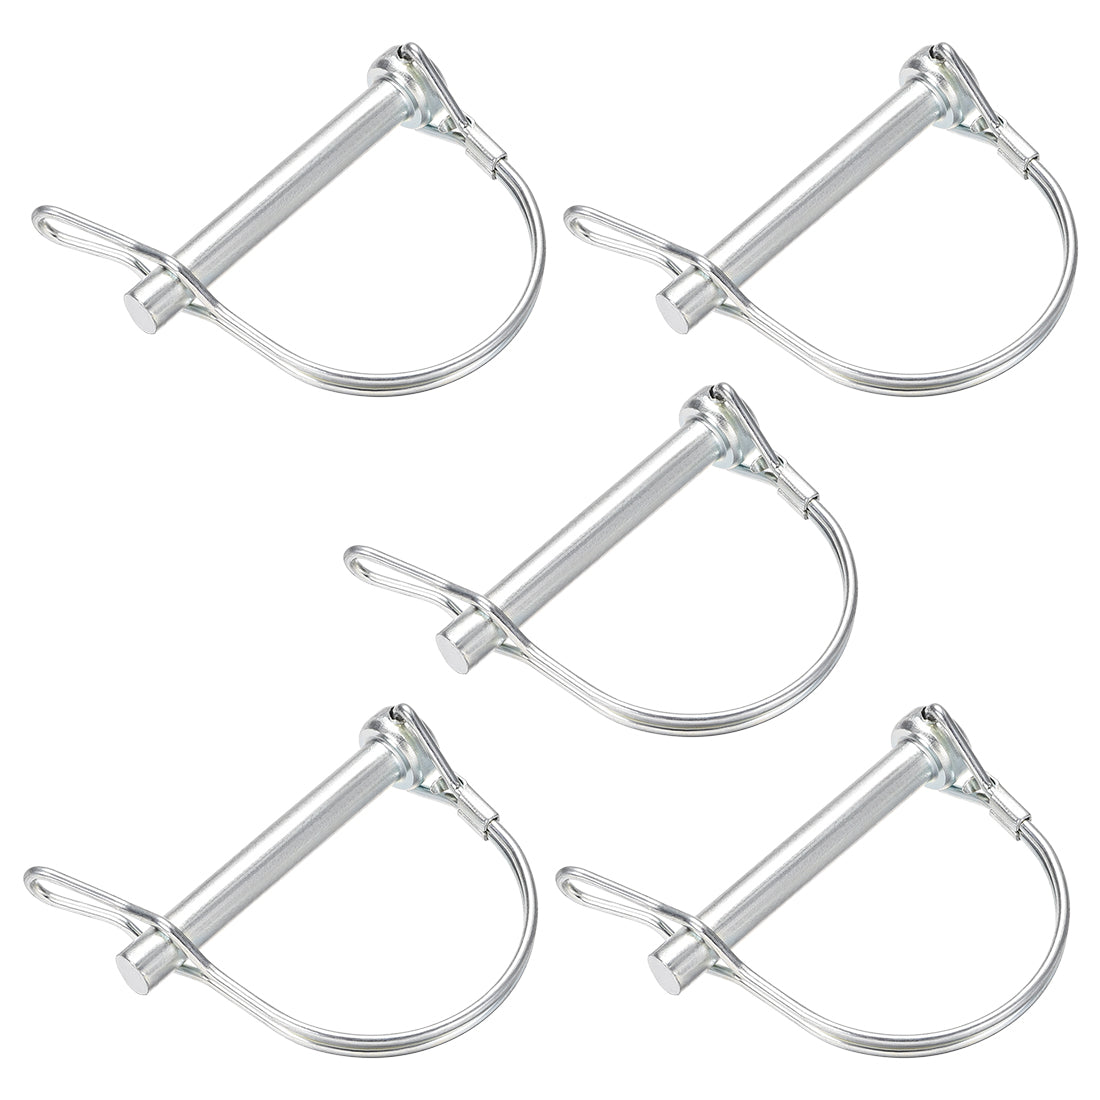 uxcell Uxcell Shaft Locking Pin w Ear 8mmx60mm Coupler Pin for Farm Trailers Lawn Arch 5Pcs